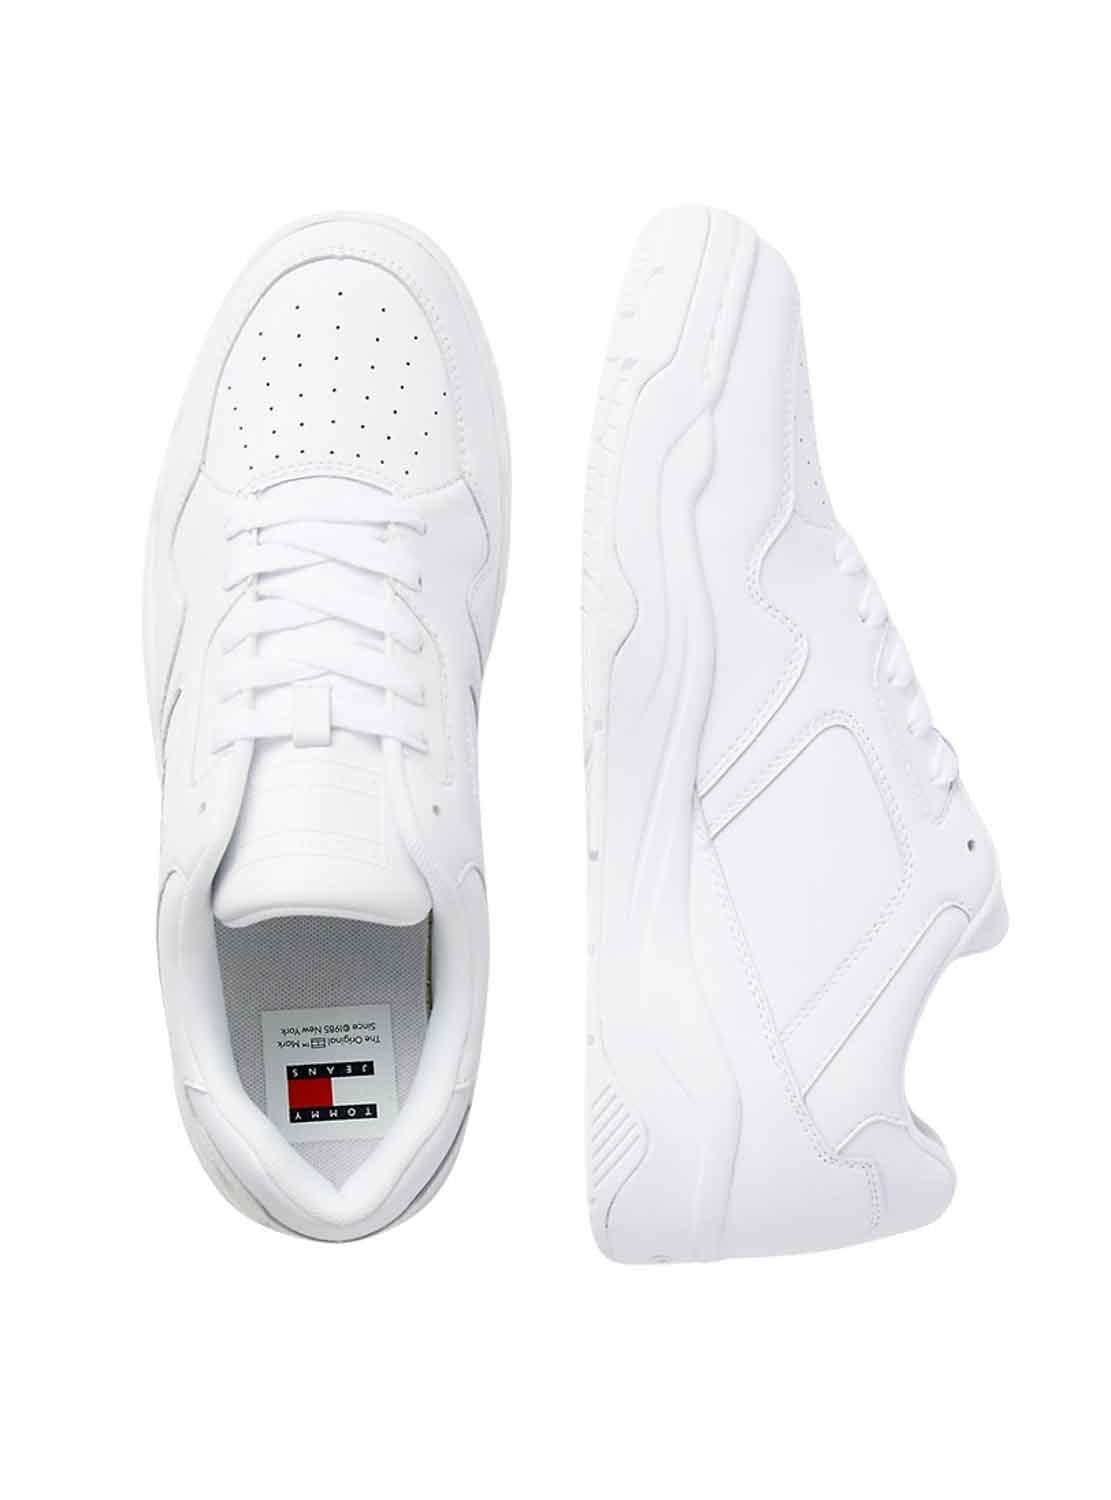 Zapatillas Tommy Jeans Leather Blanco Hombre